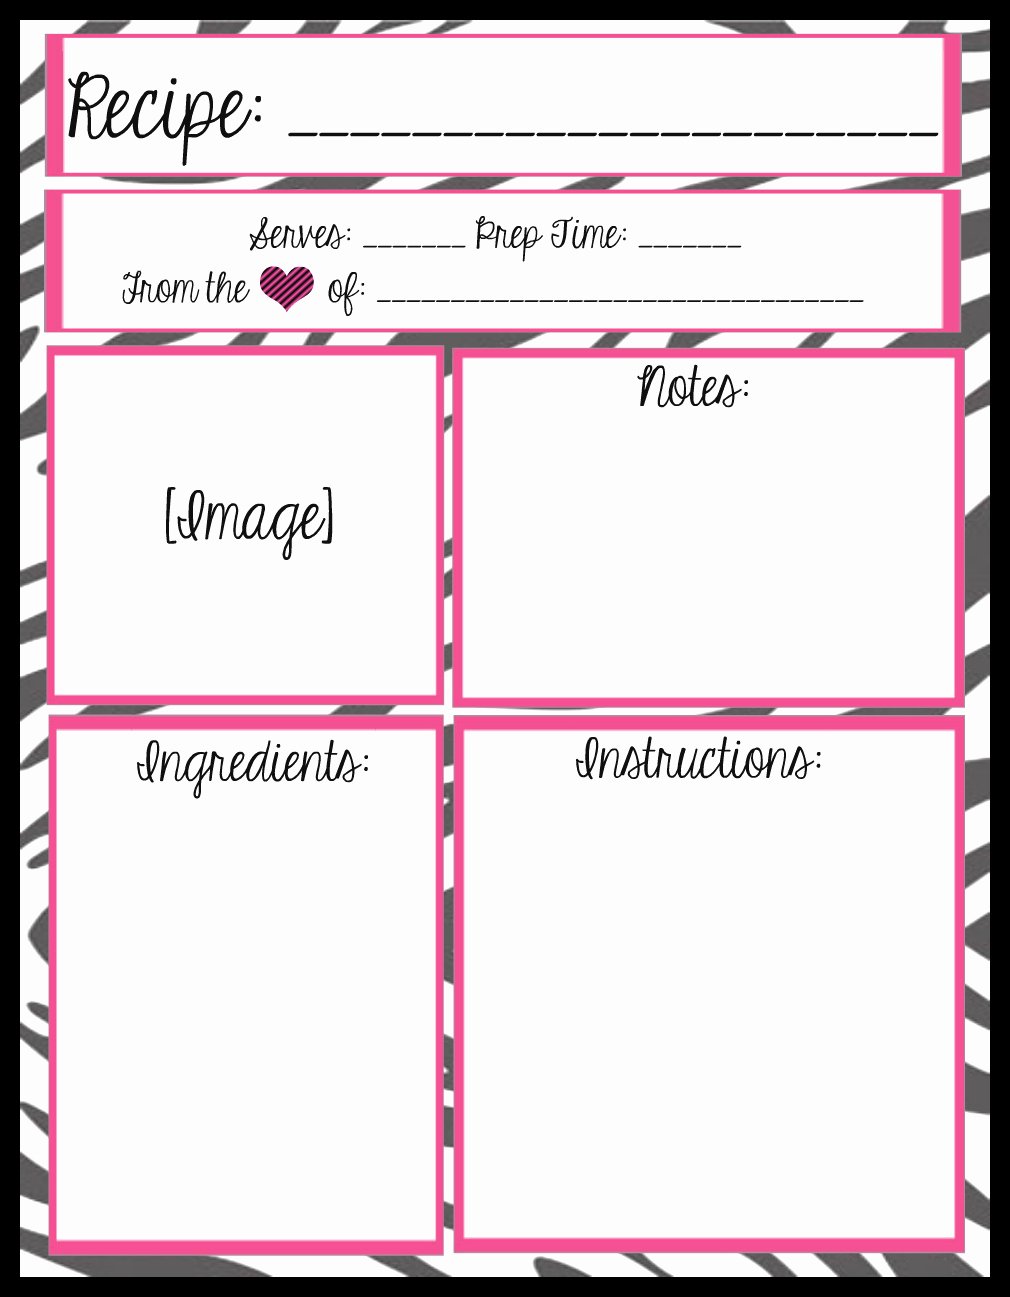 Recipe Card Template for Pages Beautiful Mesa S Place Full Page Recipe Templates [free Printables]